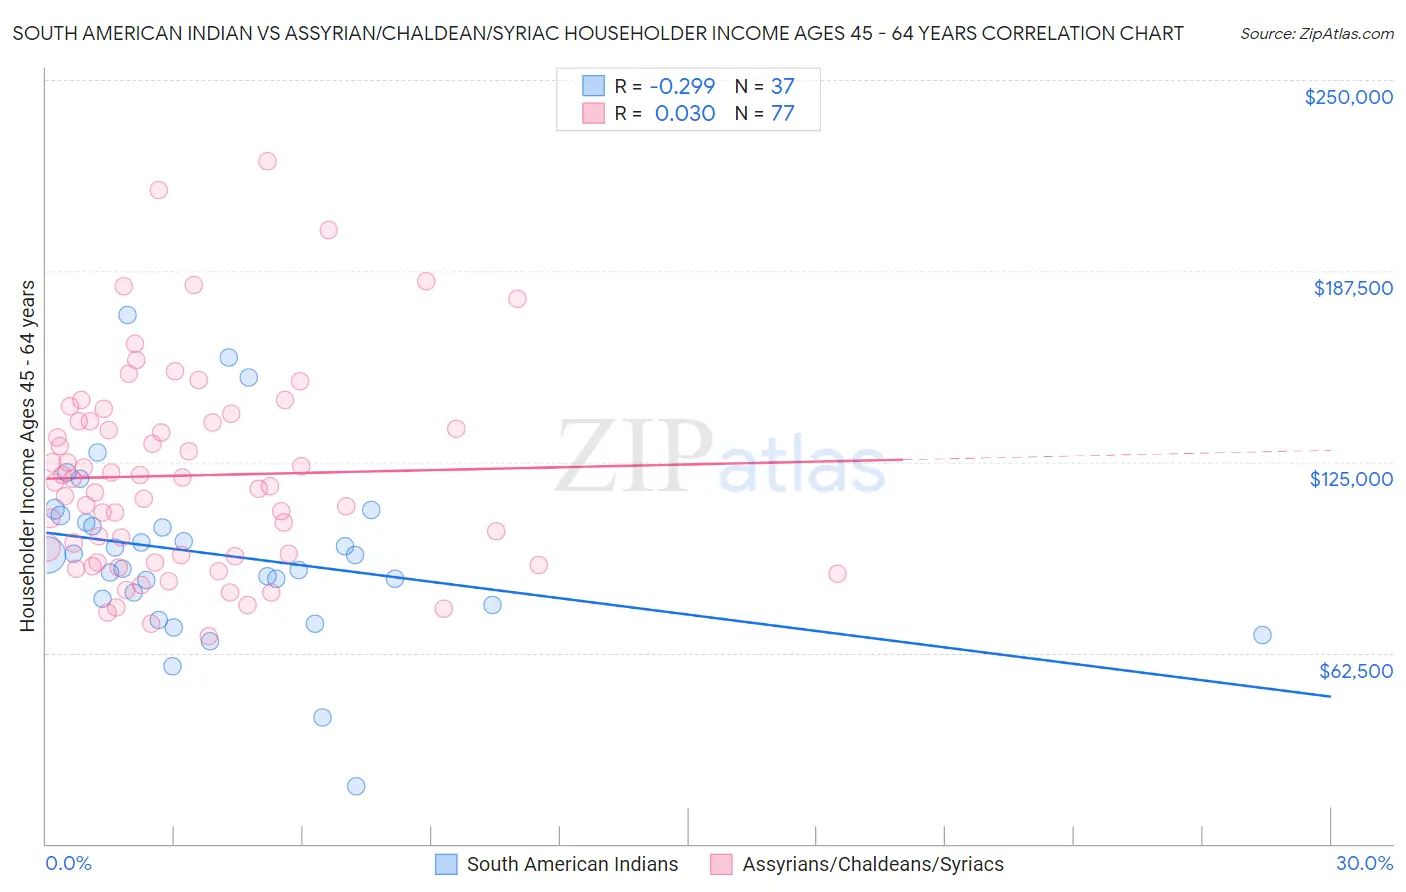 South American Indian vs Assyrian/Chaldean/Syriac Householder Income Ages 45 - 64 years